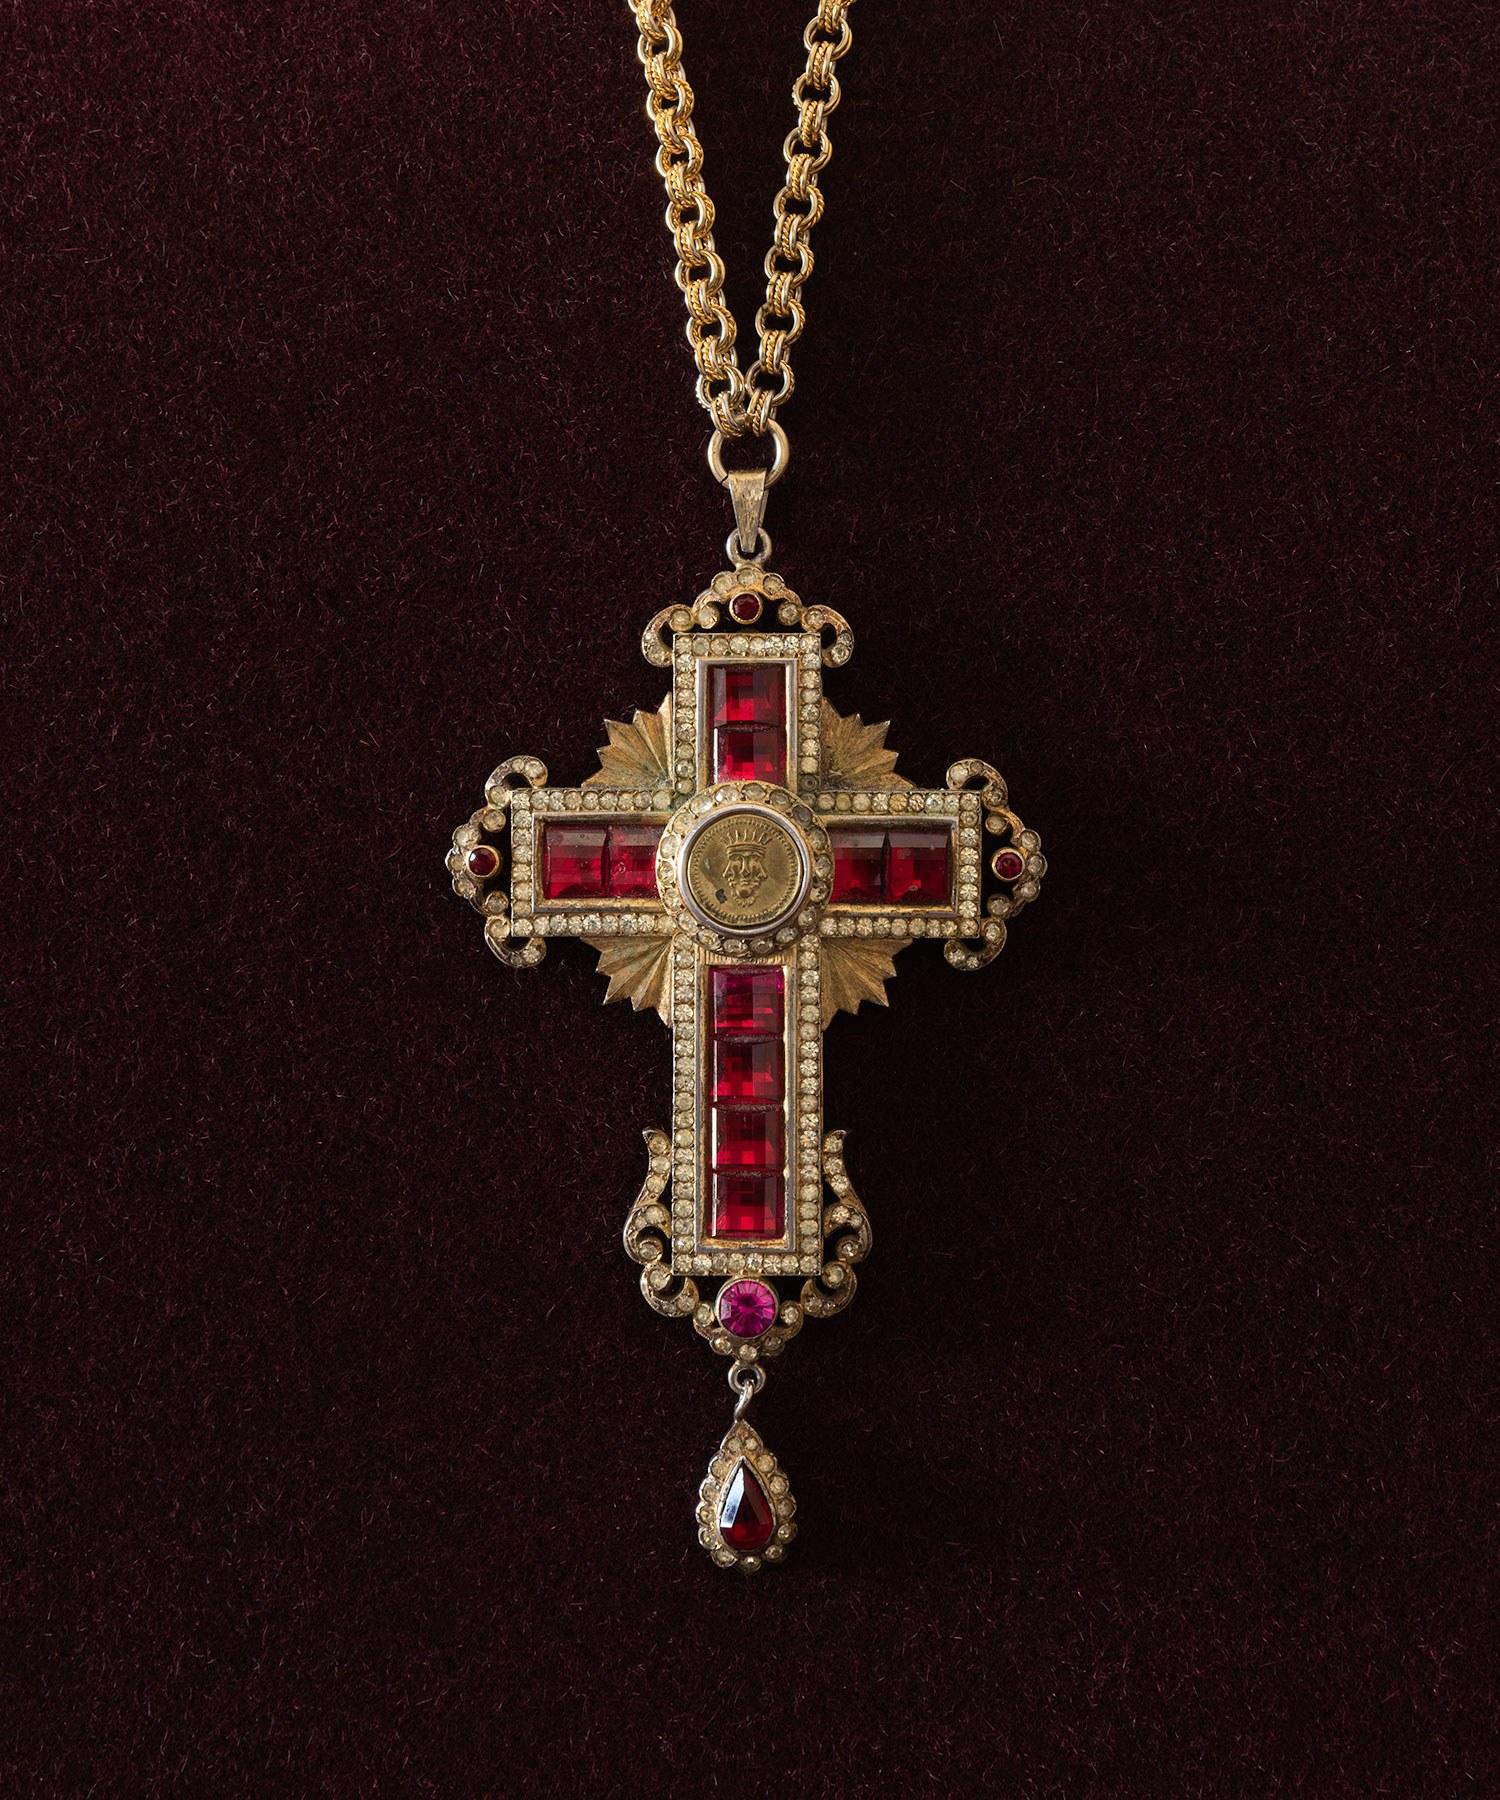 Ruby and diamond cross medallion, Italy, circa 1940.

Comes fitted within original felt-lined, leather-bound box; gilded metal with costume ruby and diamond inlay, with embossed trinity symbol at the center, and hanging from a weighty golden